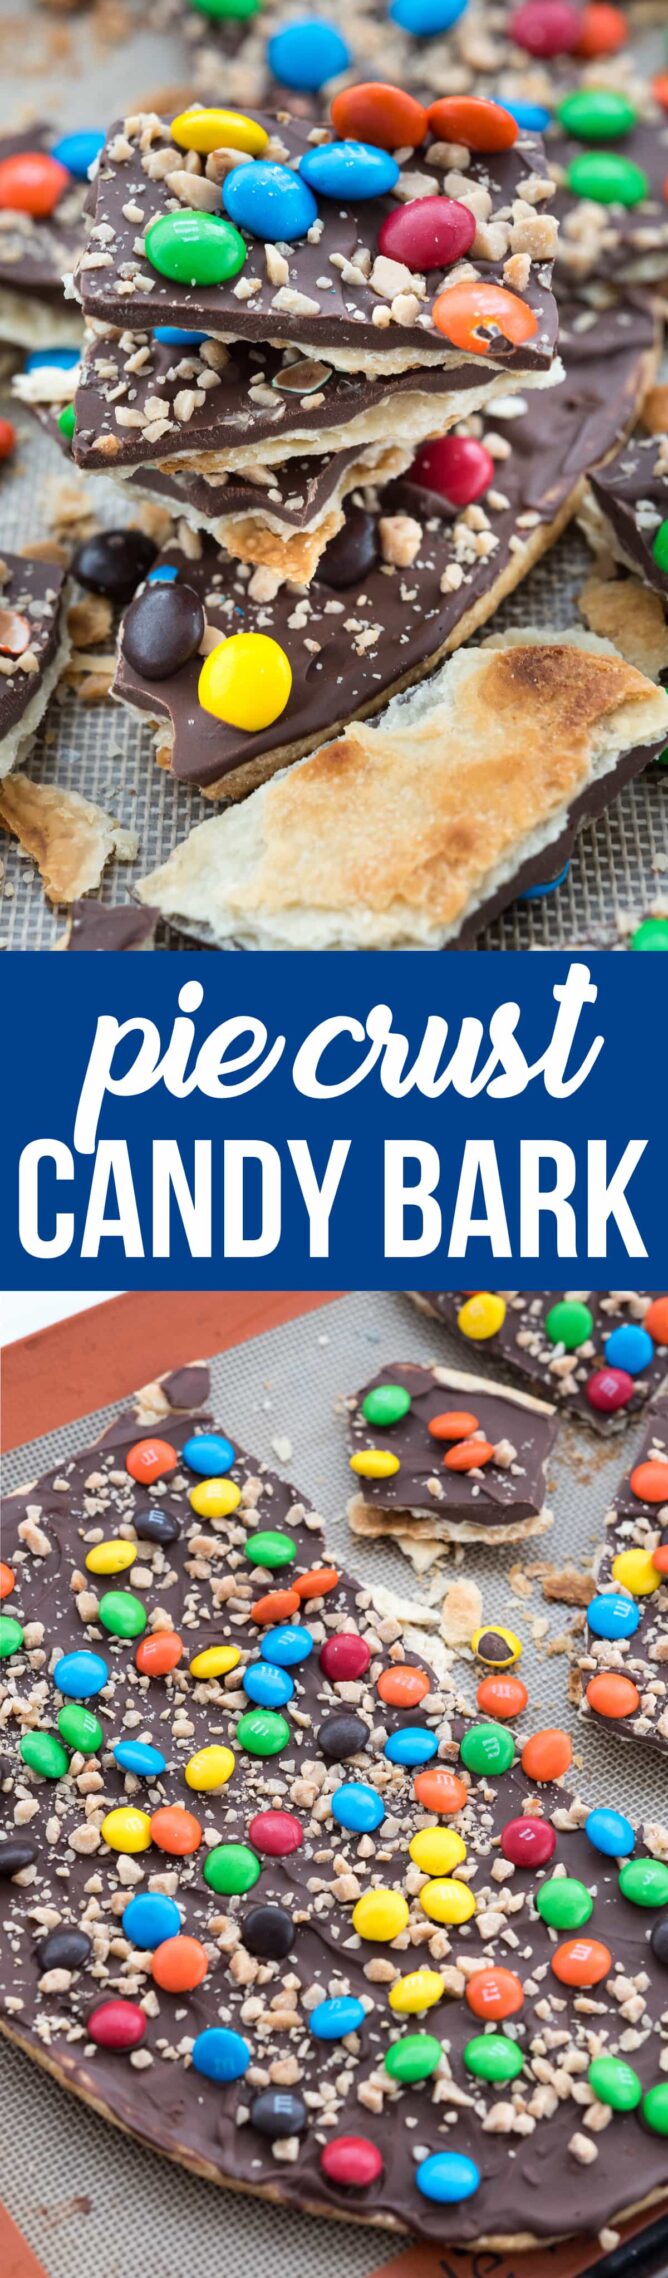 Collage of Pie crust candy bark